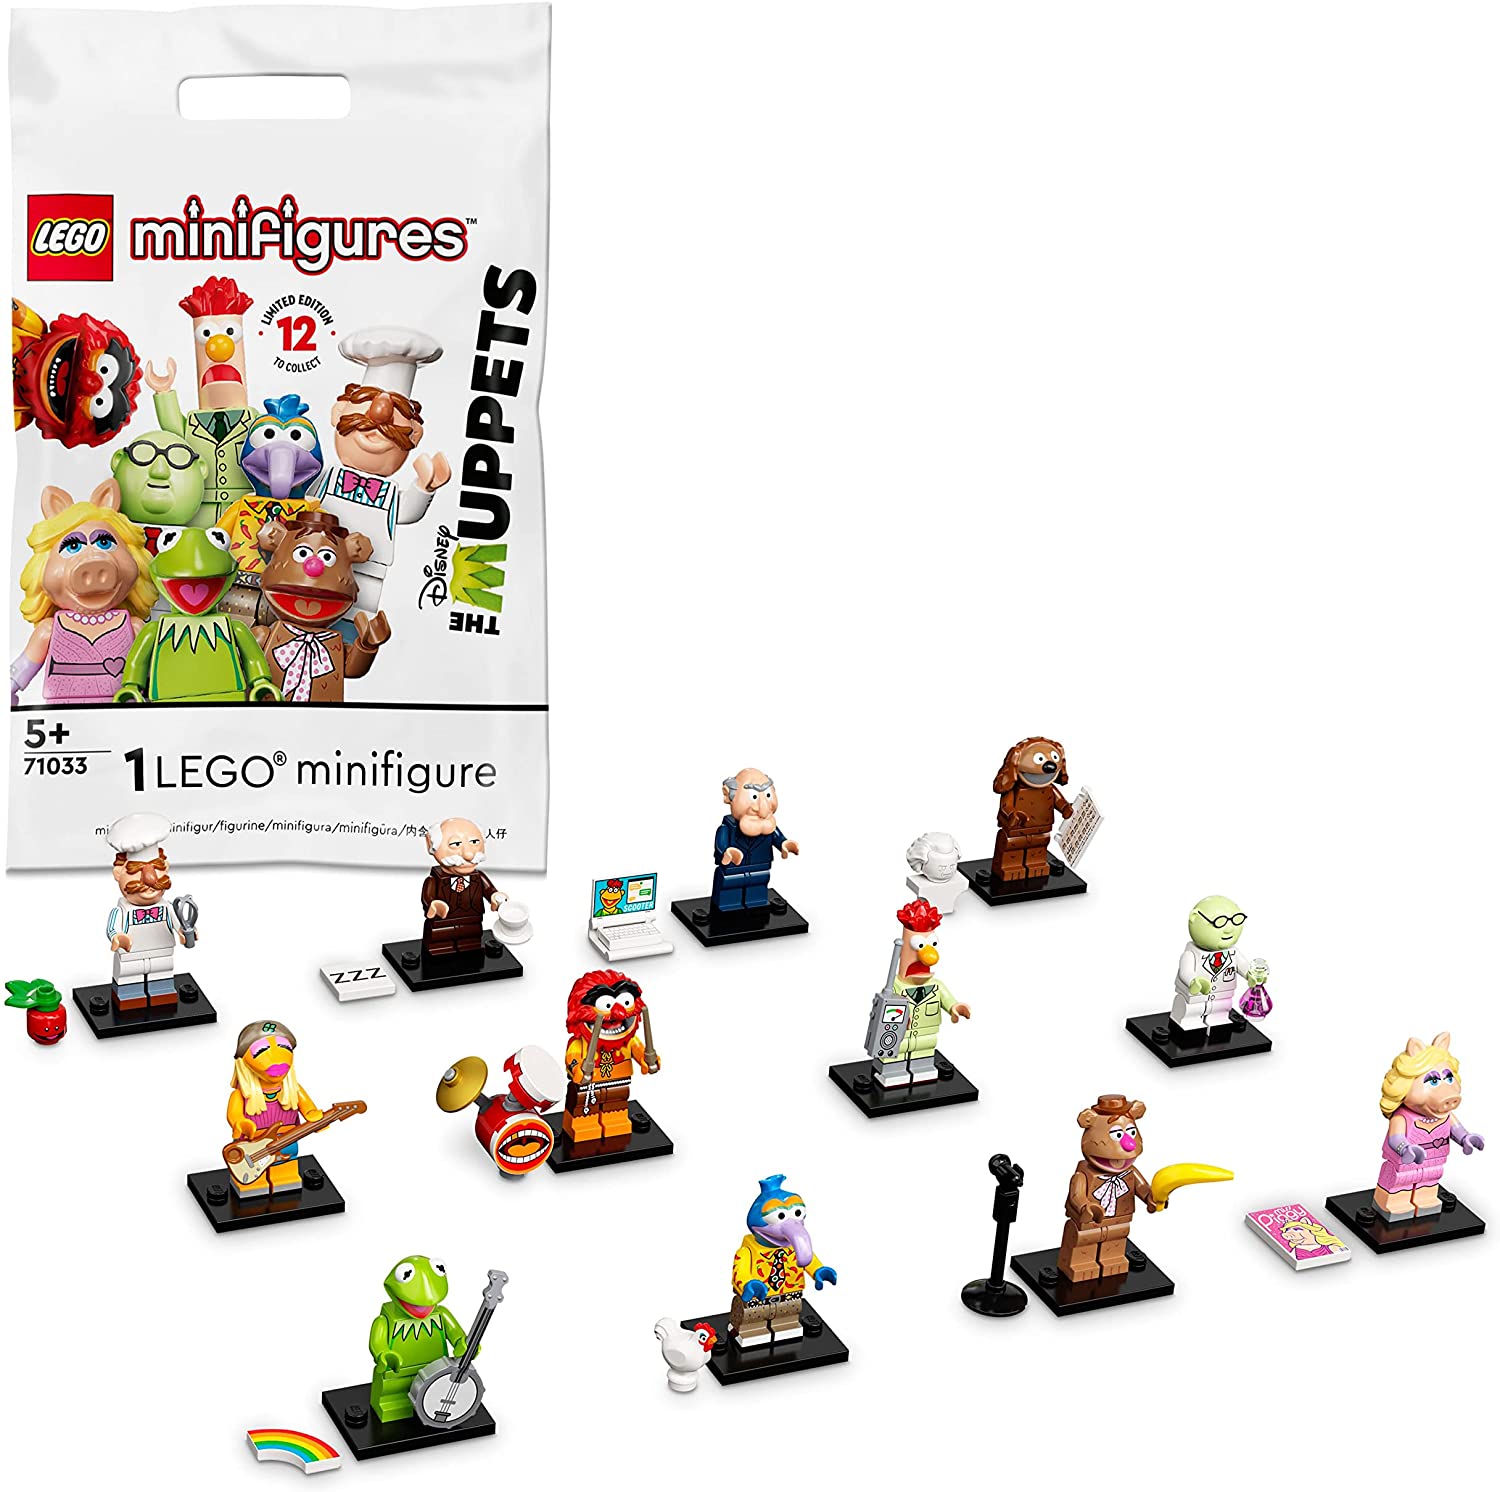 LEGO 71033 The Muppets Mini Figures, Set of 1 of 12 Collectable Minifigures, including Miss Piggy and Kermit the Frog, Limited Edition Collection (1 Piece - Style Selected at Random)